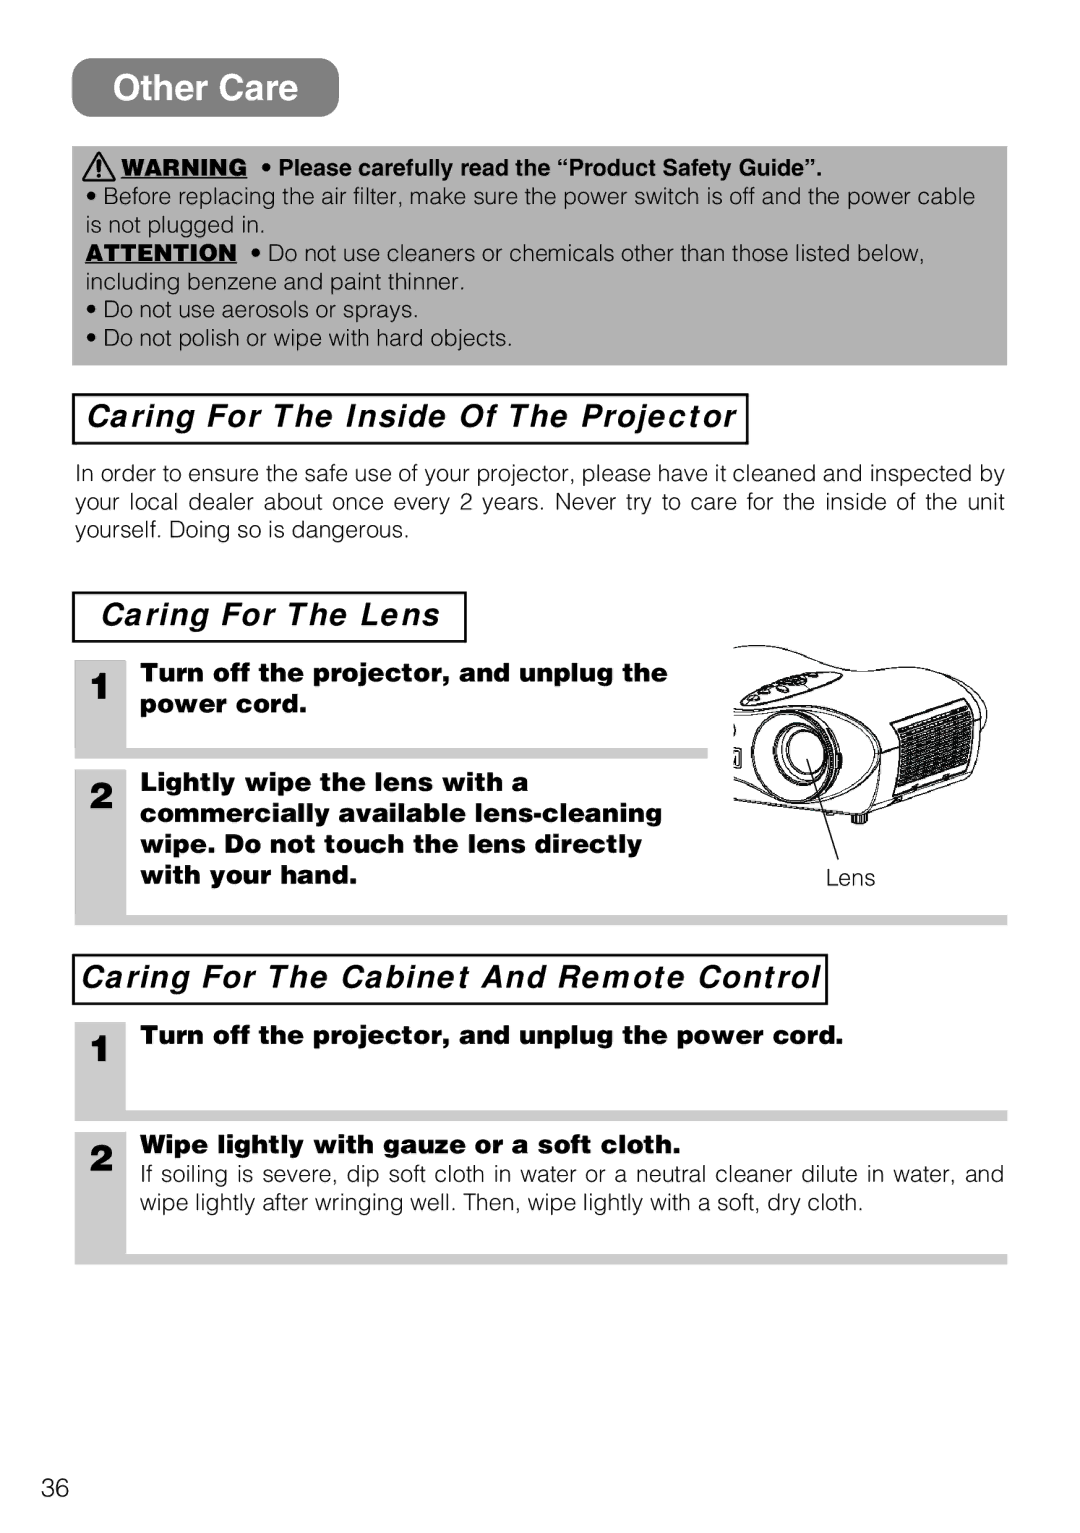 3M S10C Other Care, Caring For The Inside Of The Projector, Caring For The Lens, Caring For The Cabinet And Remote Control 